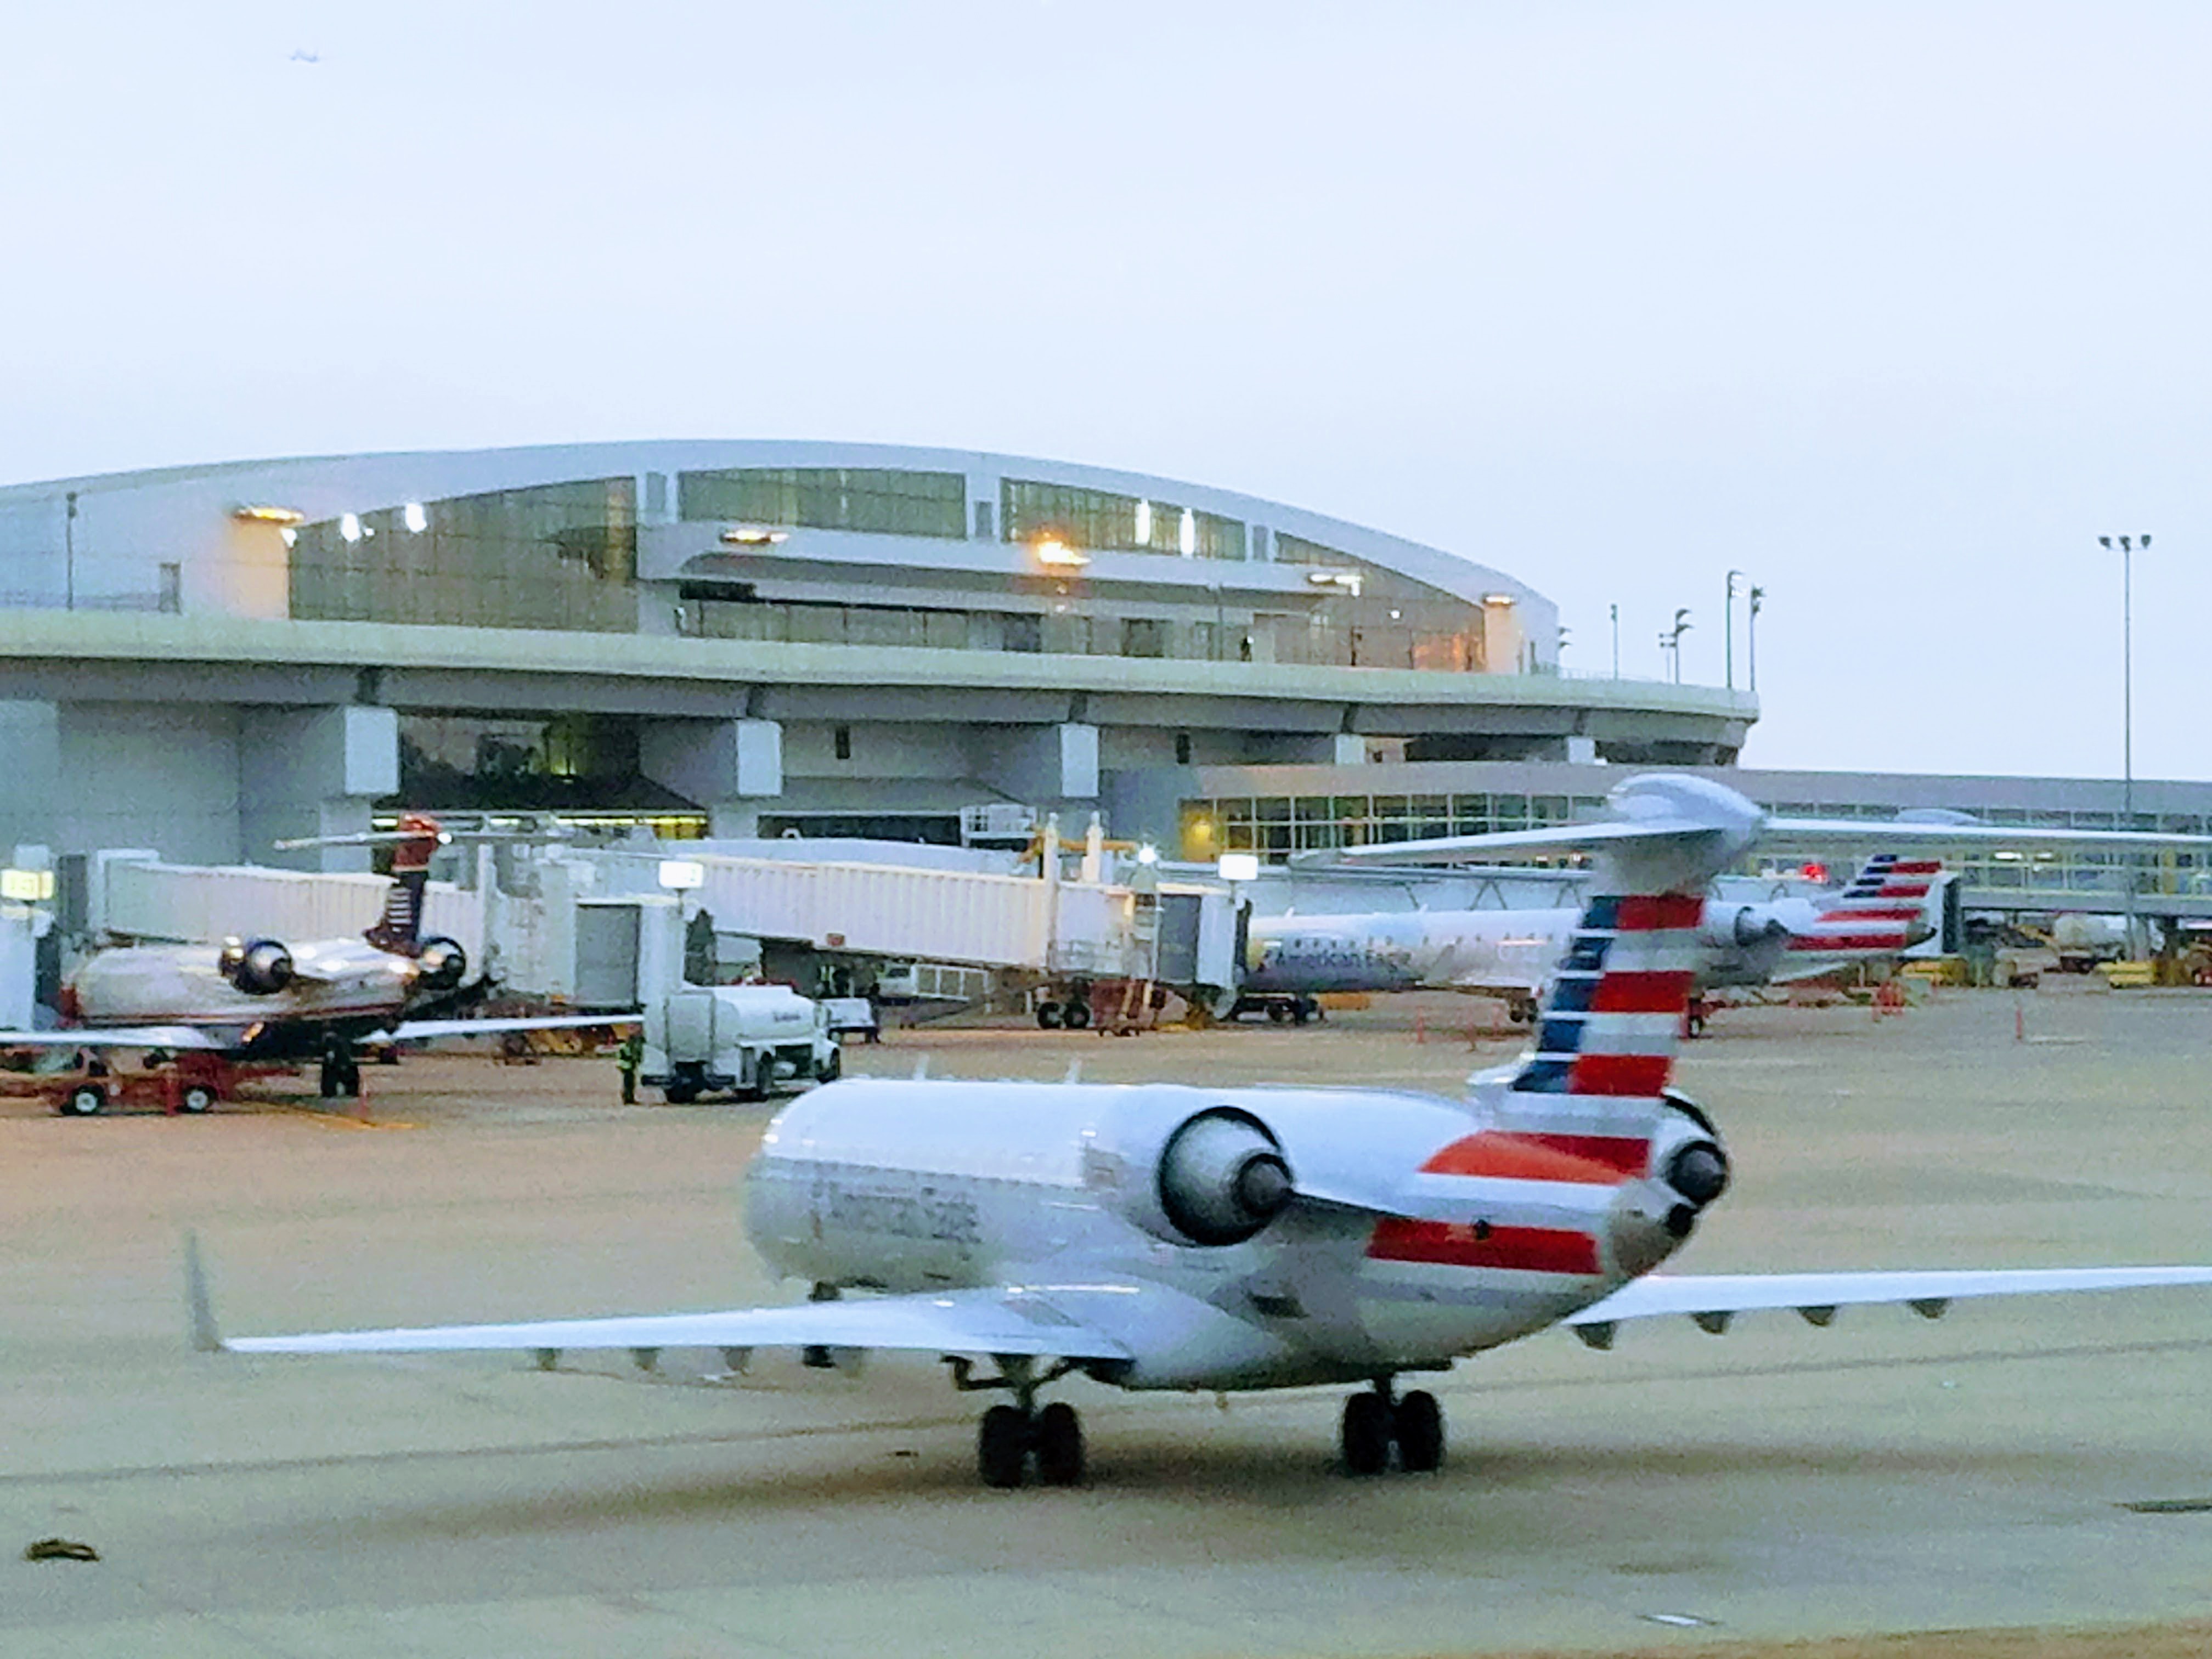 American Airlines Passenger Calls 911 To Be Freed From Plane After Three Hour Tarmac Delay